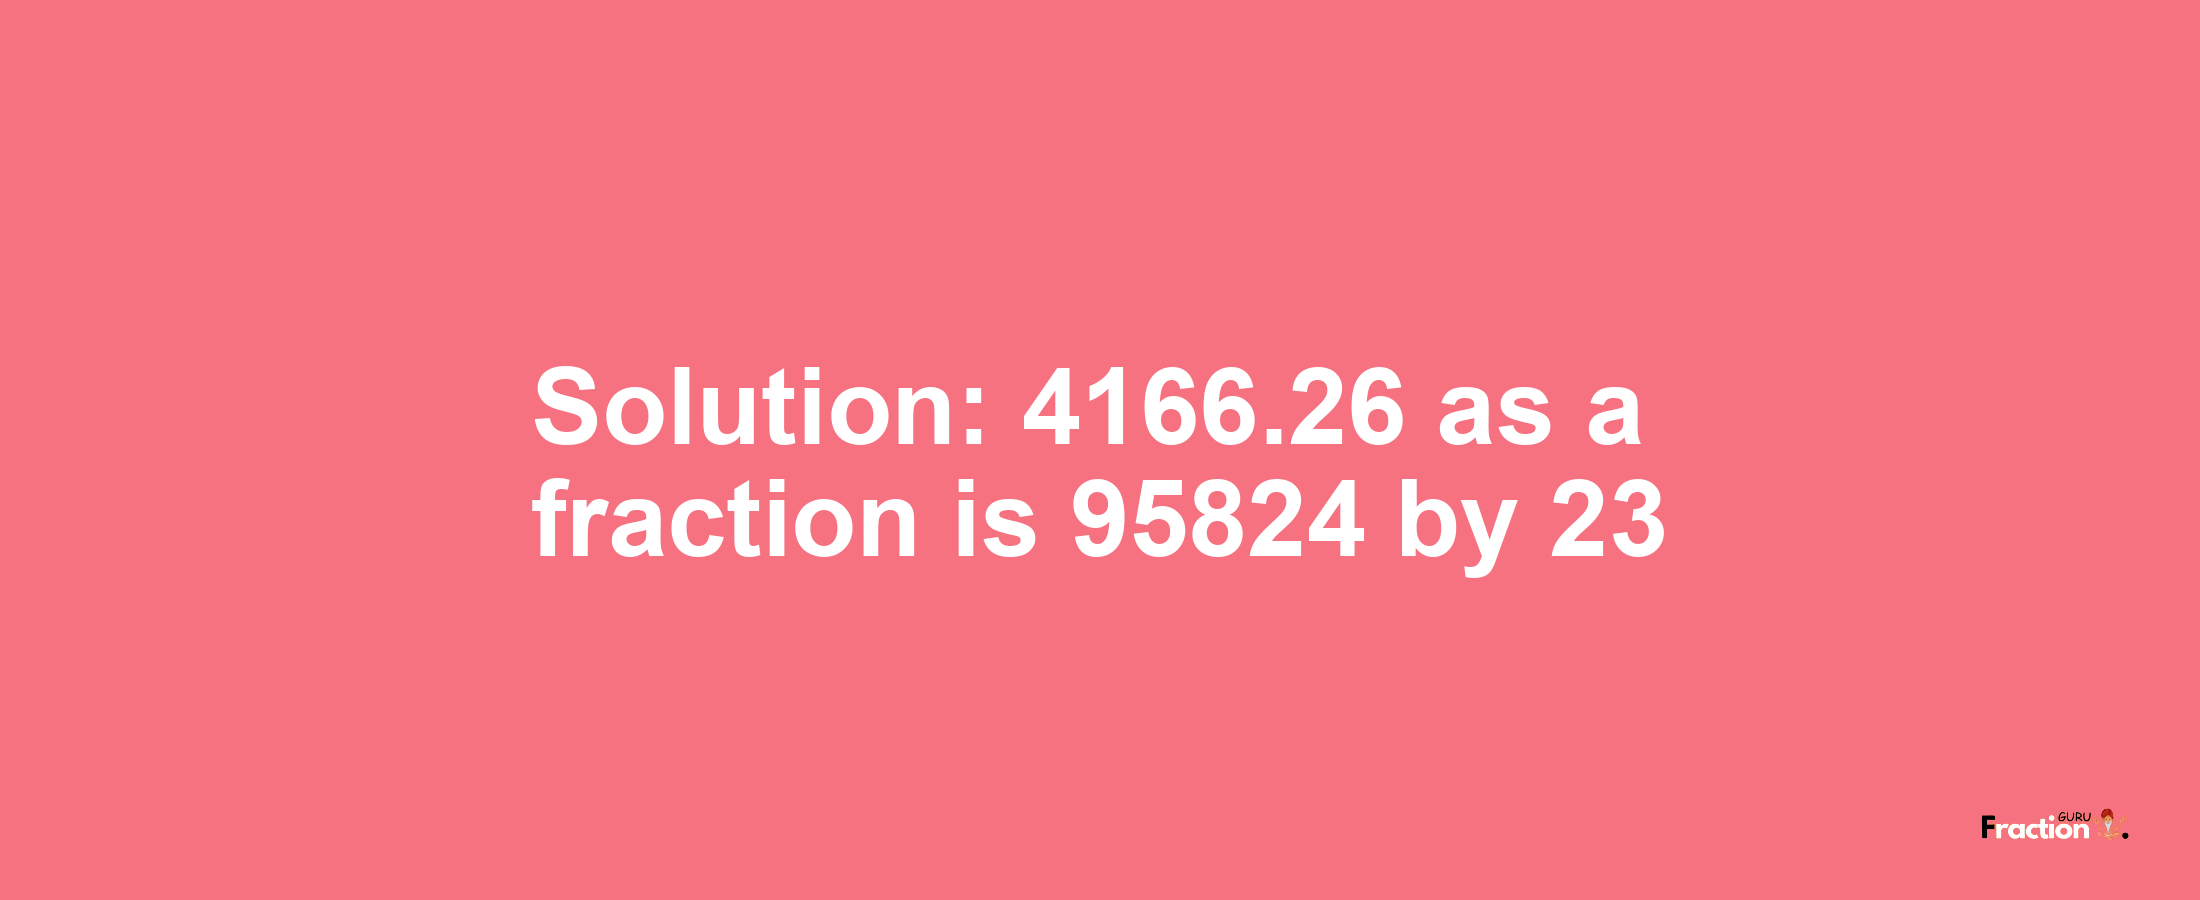 Solution:4166.26 as a fraction is 95824/23